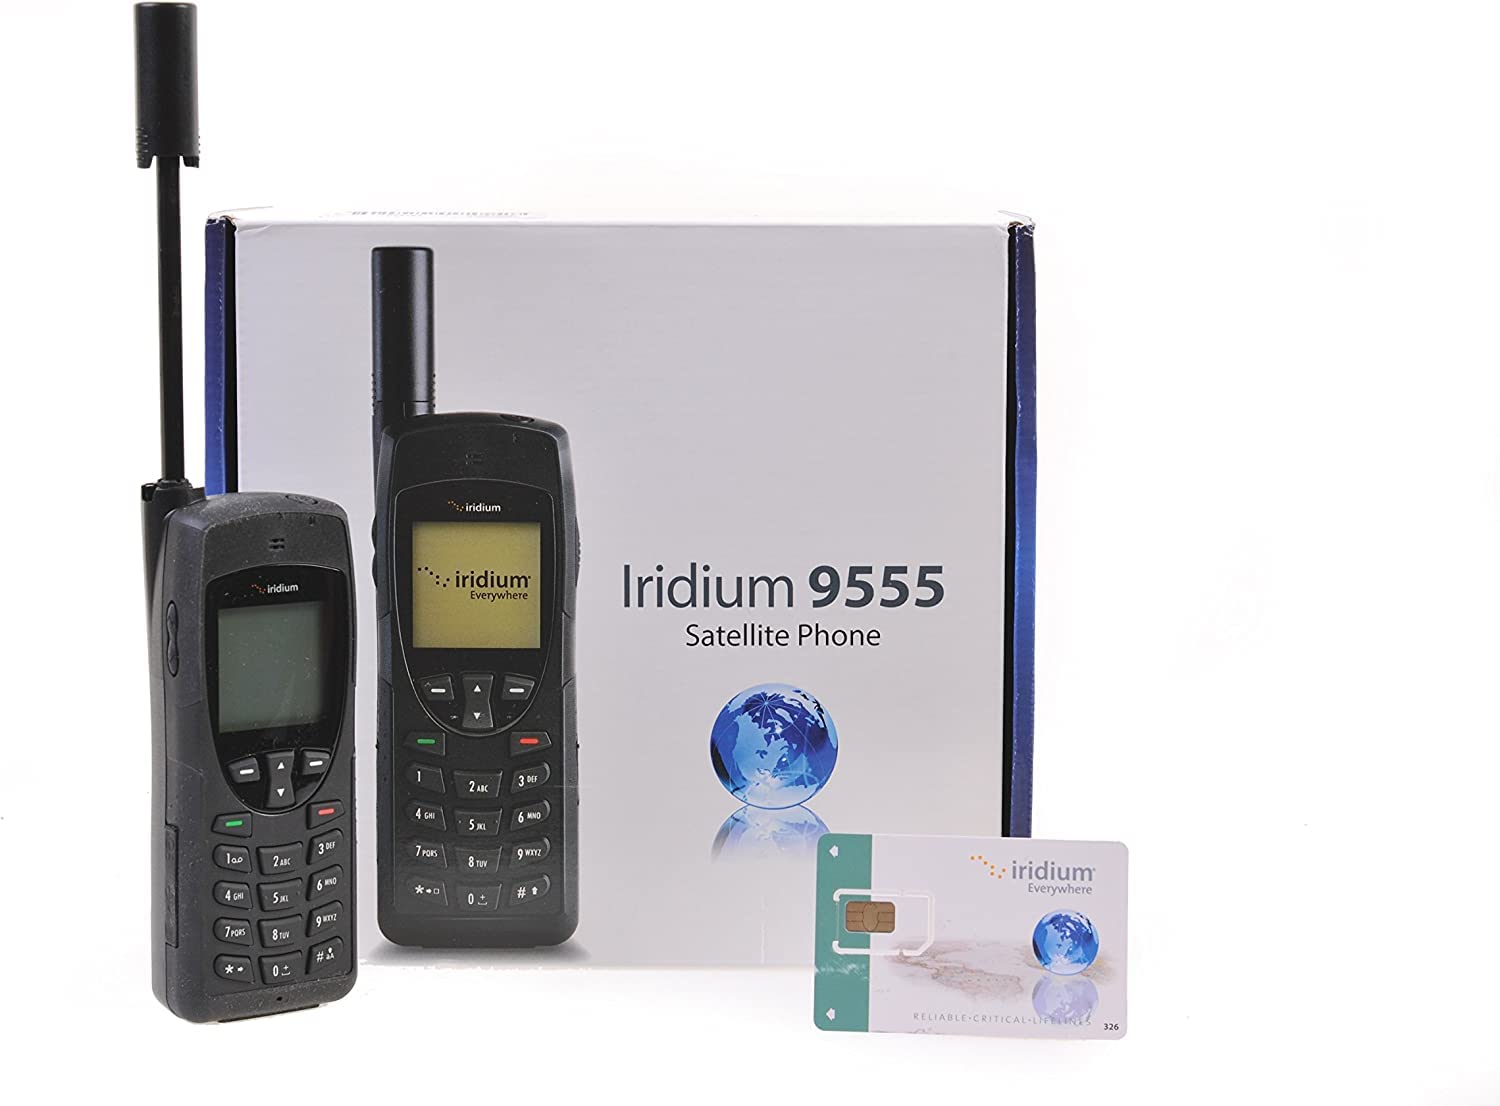 Iridium 9555 Satellite Phone Telephone with Prepaid SIM Card and 100 Airtime Minutes / 90 Day Validity - Voice, Text Messaging SMS Global Coverage